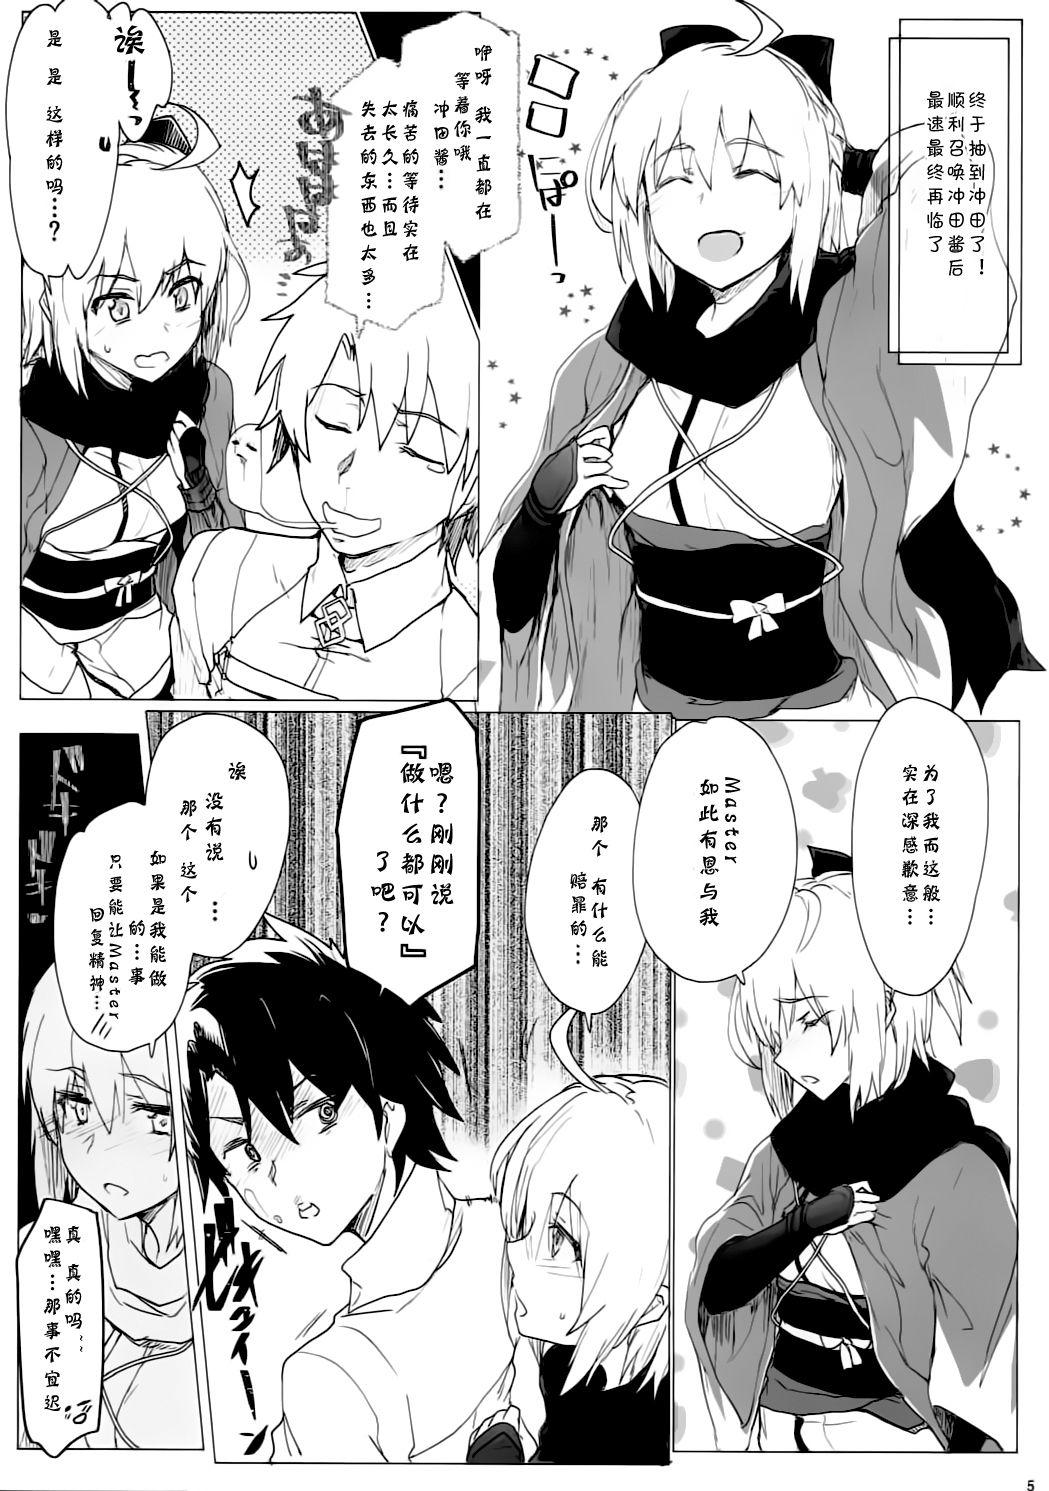 Bro My Room Sex Collection - Fate grand order Doctor - Page 5